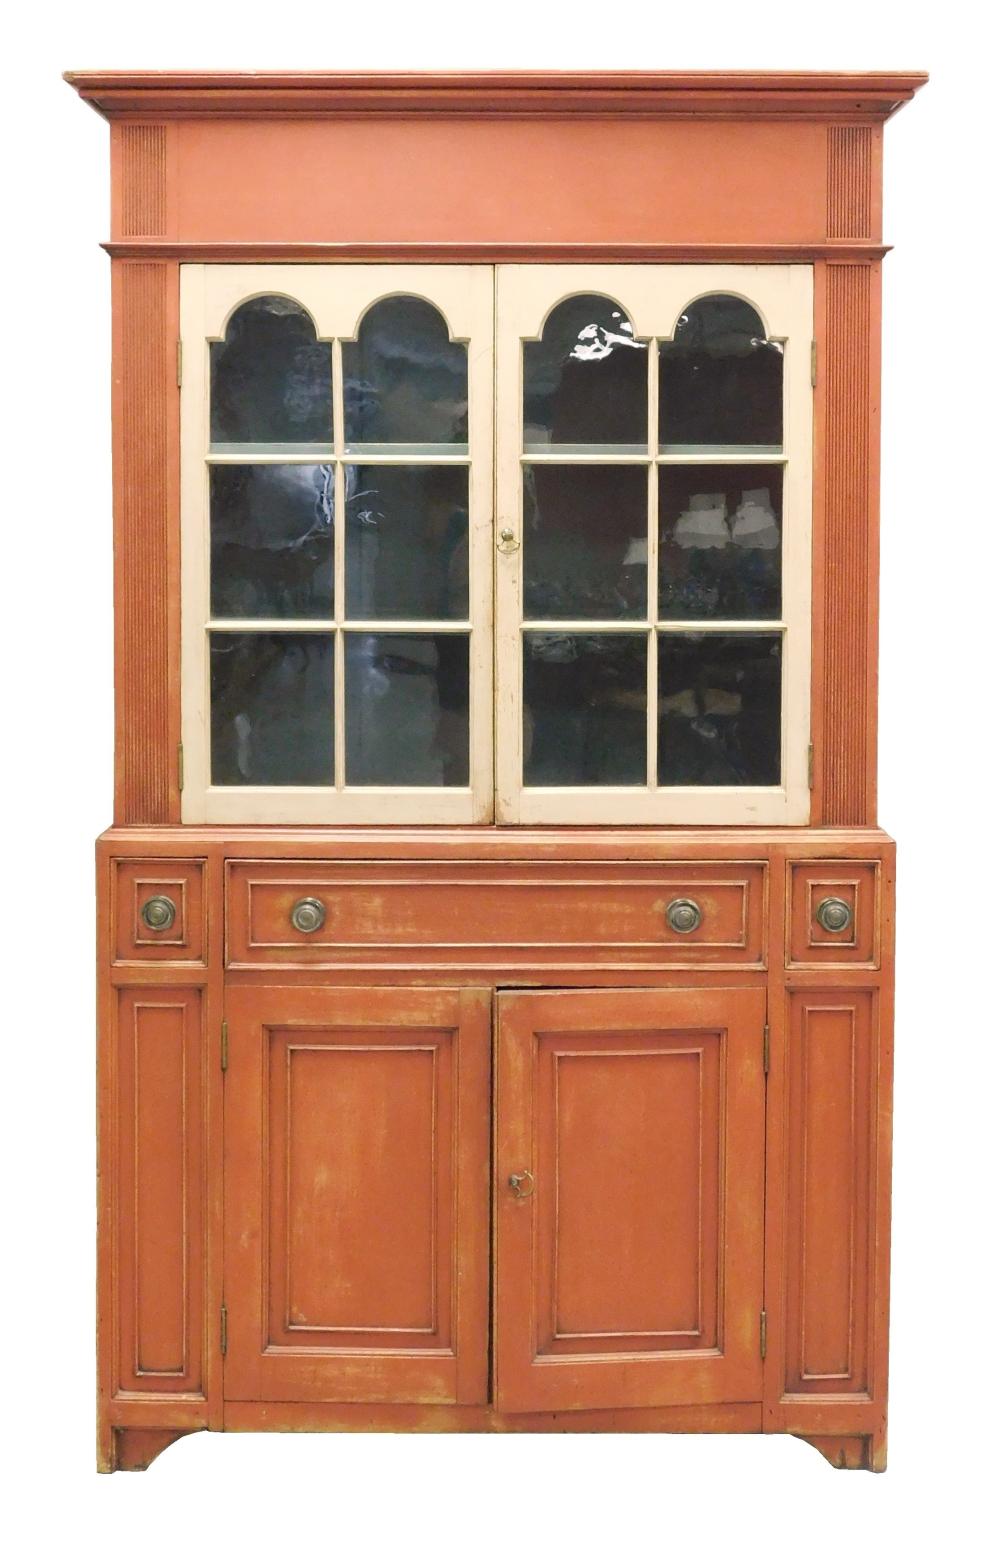 COUNTRY CUPBOARD IN RED AND CREAM 2e2d29